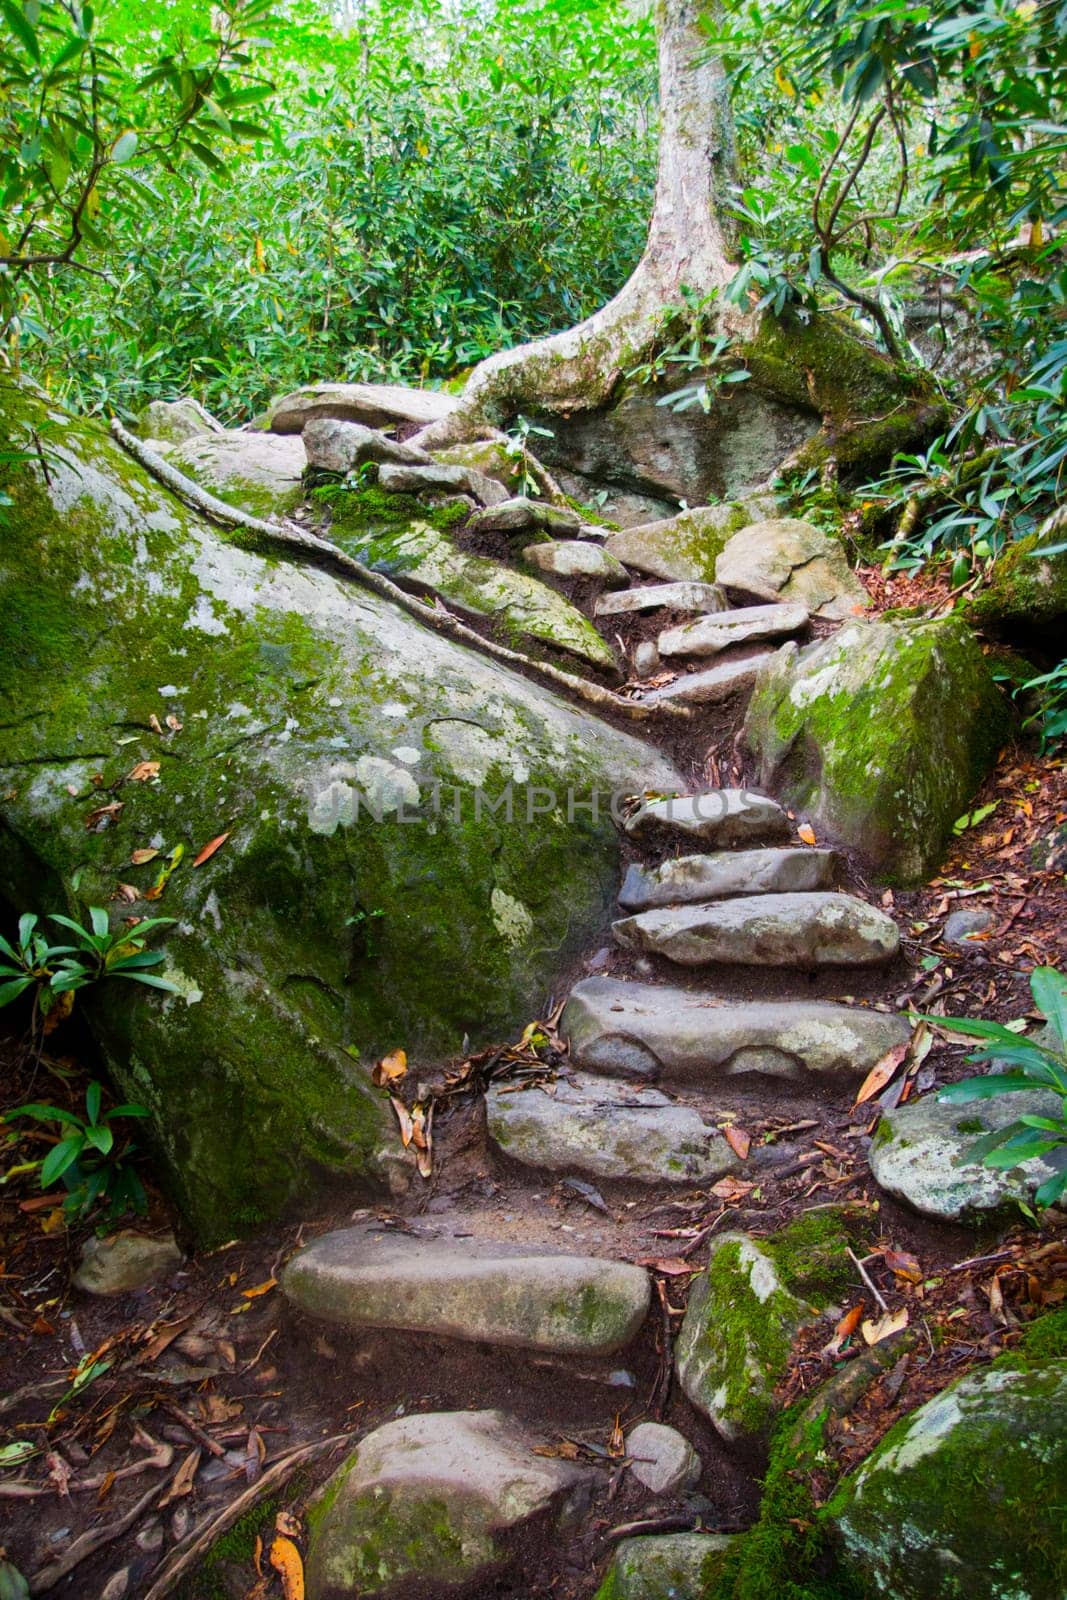 Traverse the enchanted forest: A moss-covered stone stairway guides you through a lush wilderness, embraced by an ancient tree. Explore nature's serenity and embark on your next adventure.